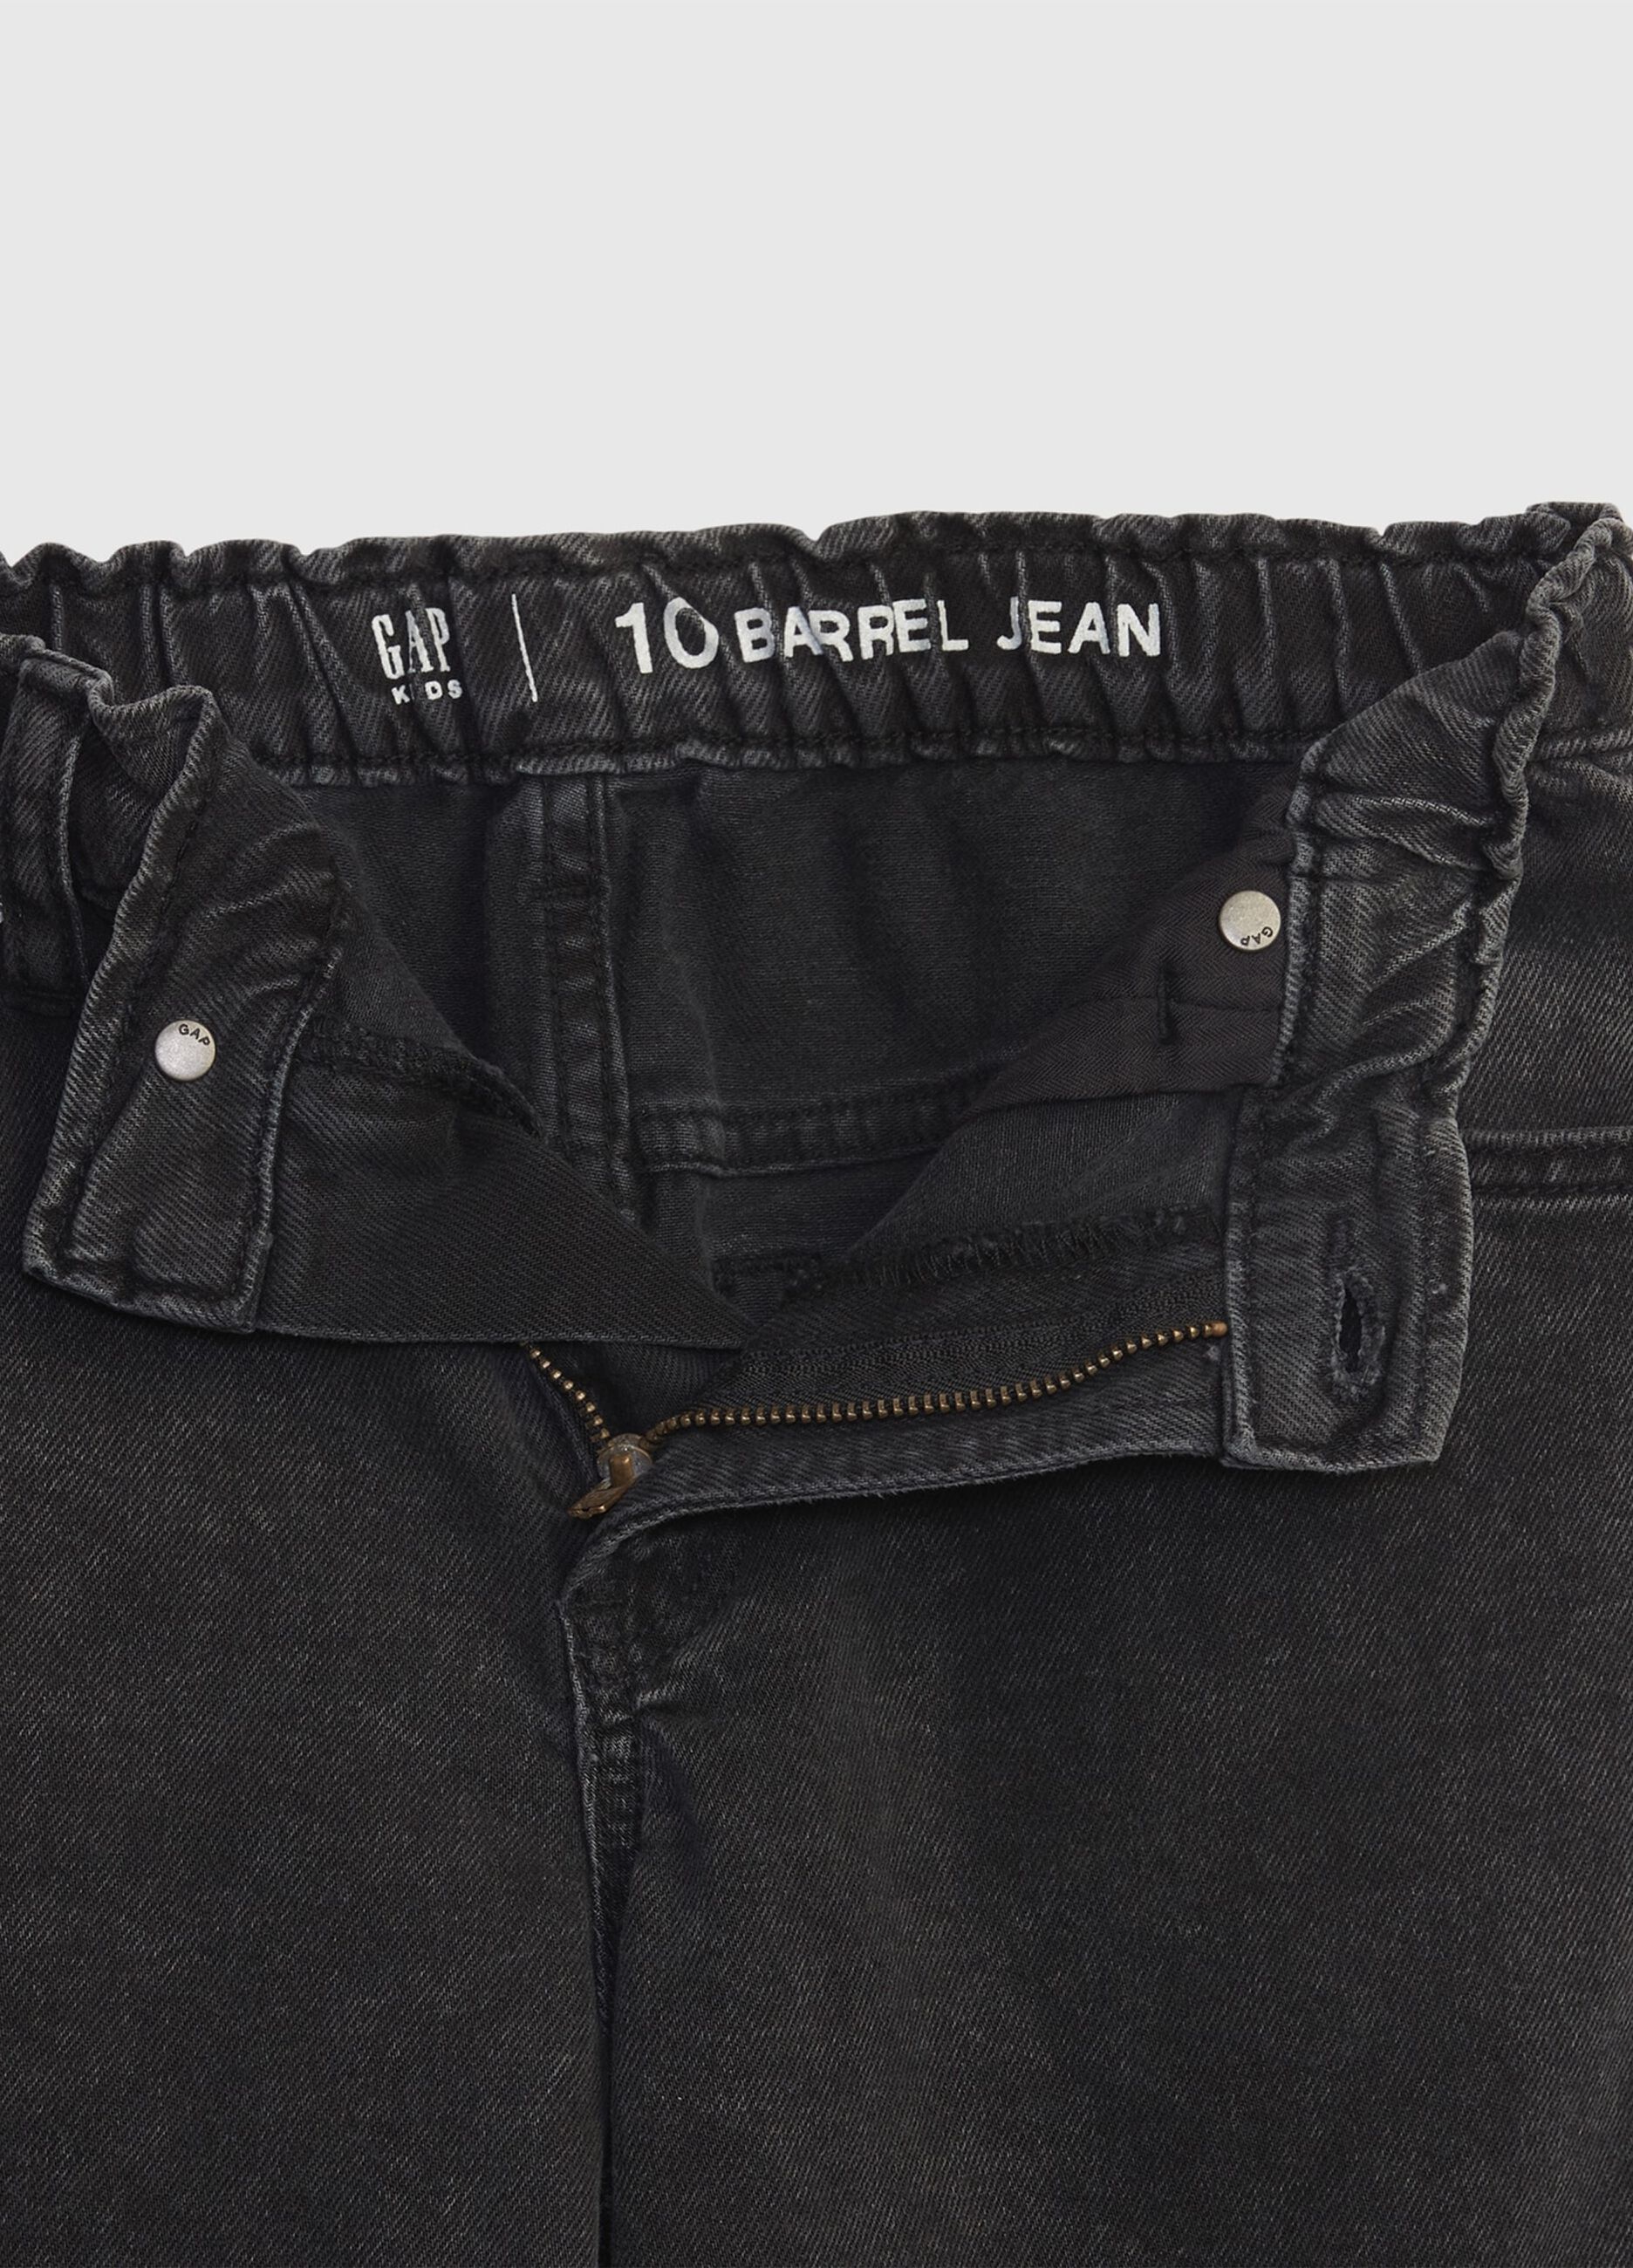 Barrel jeans with elastic waist band